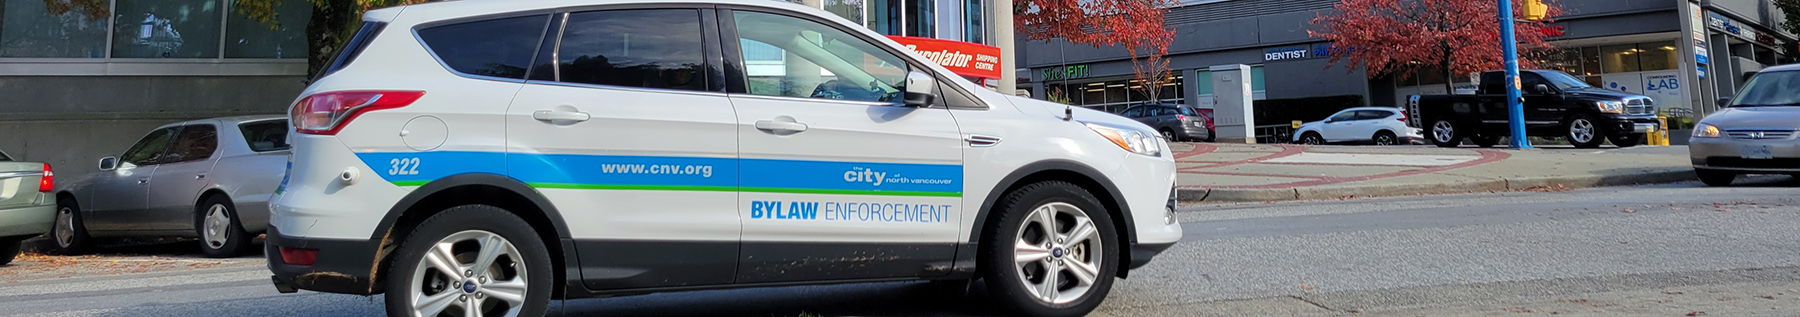 Bylaw Services vehicle